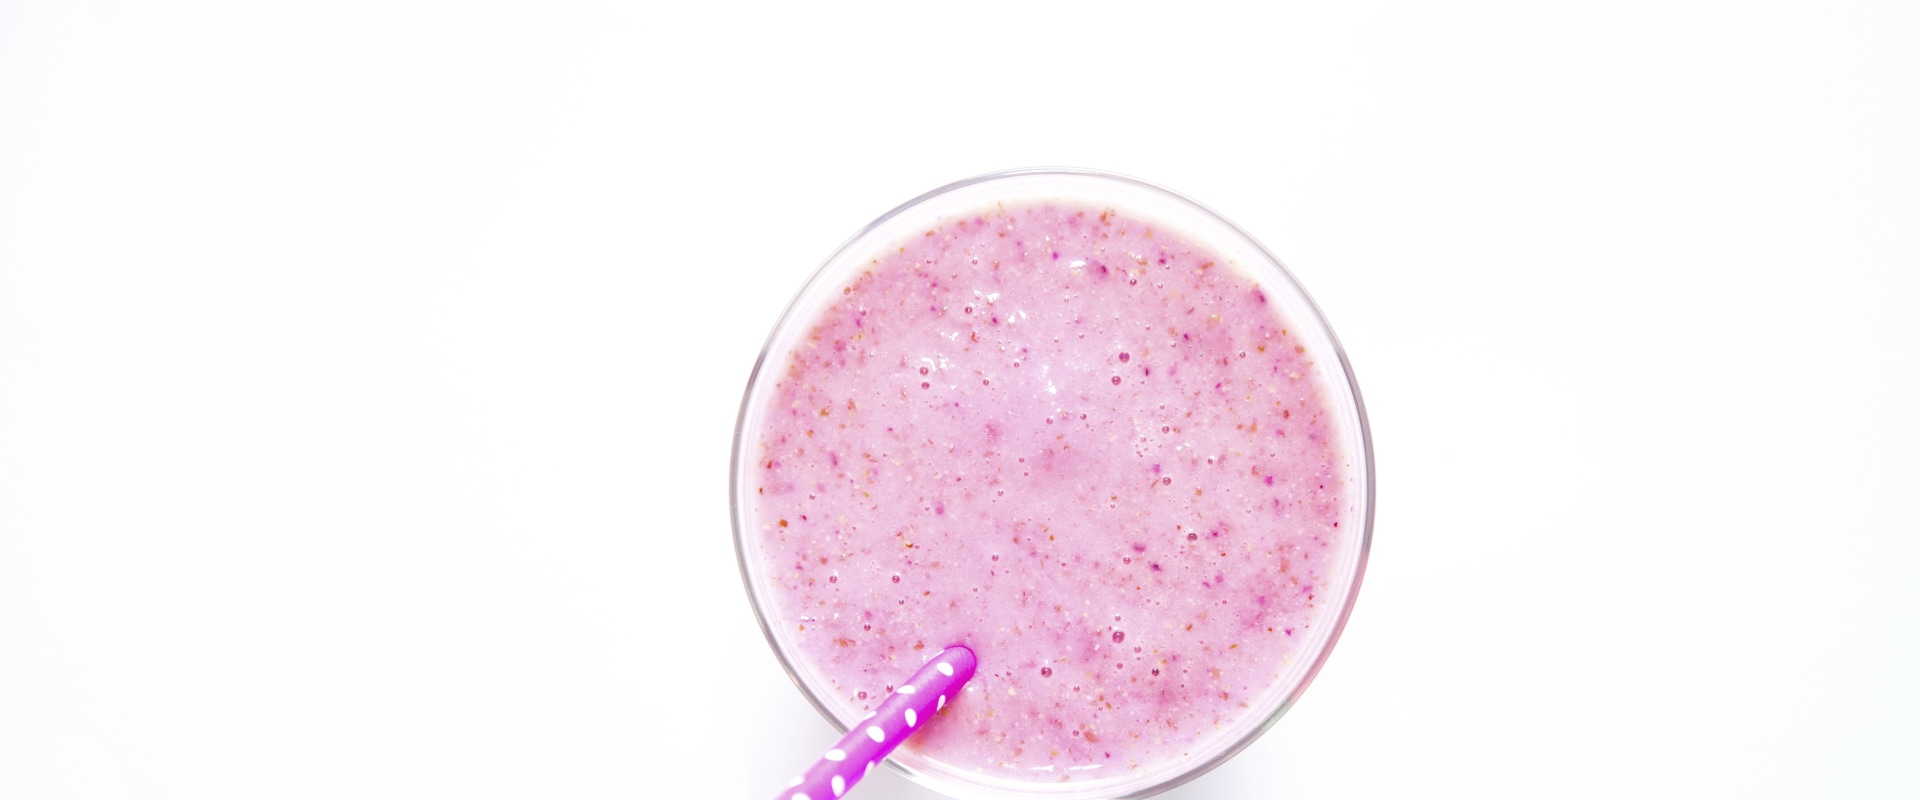 Mixing Your Own Ingredients with Protein Powder - A Guide for Delicious and Nutritious Shakes